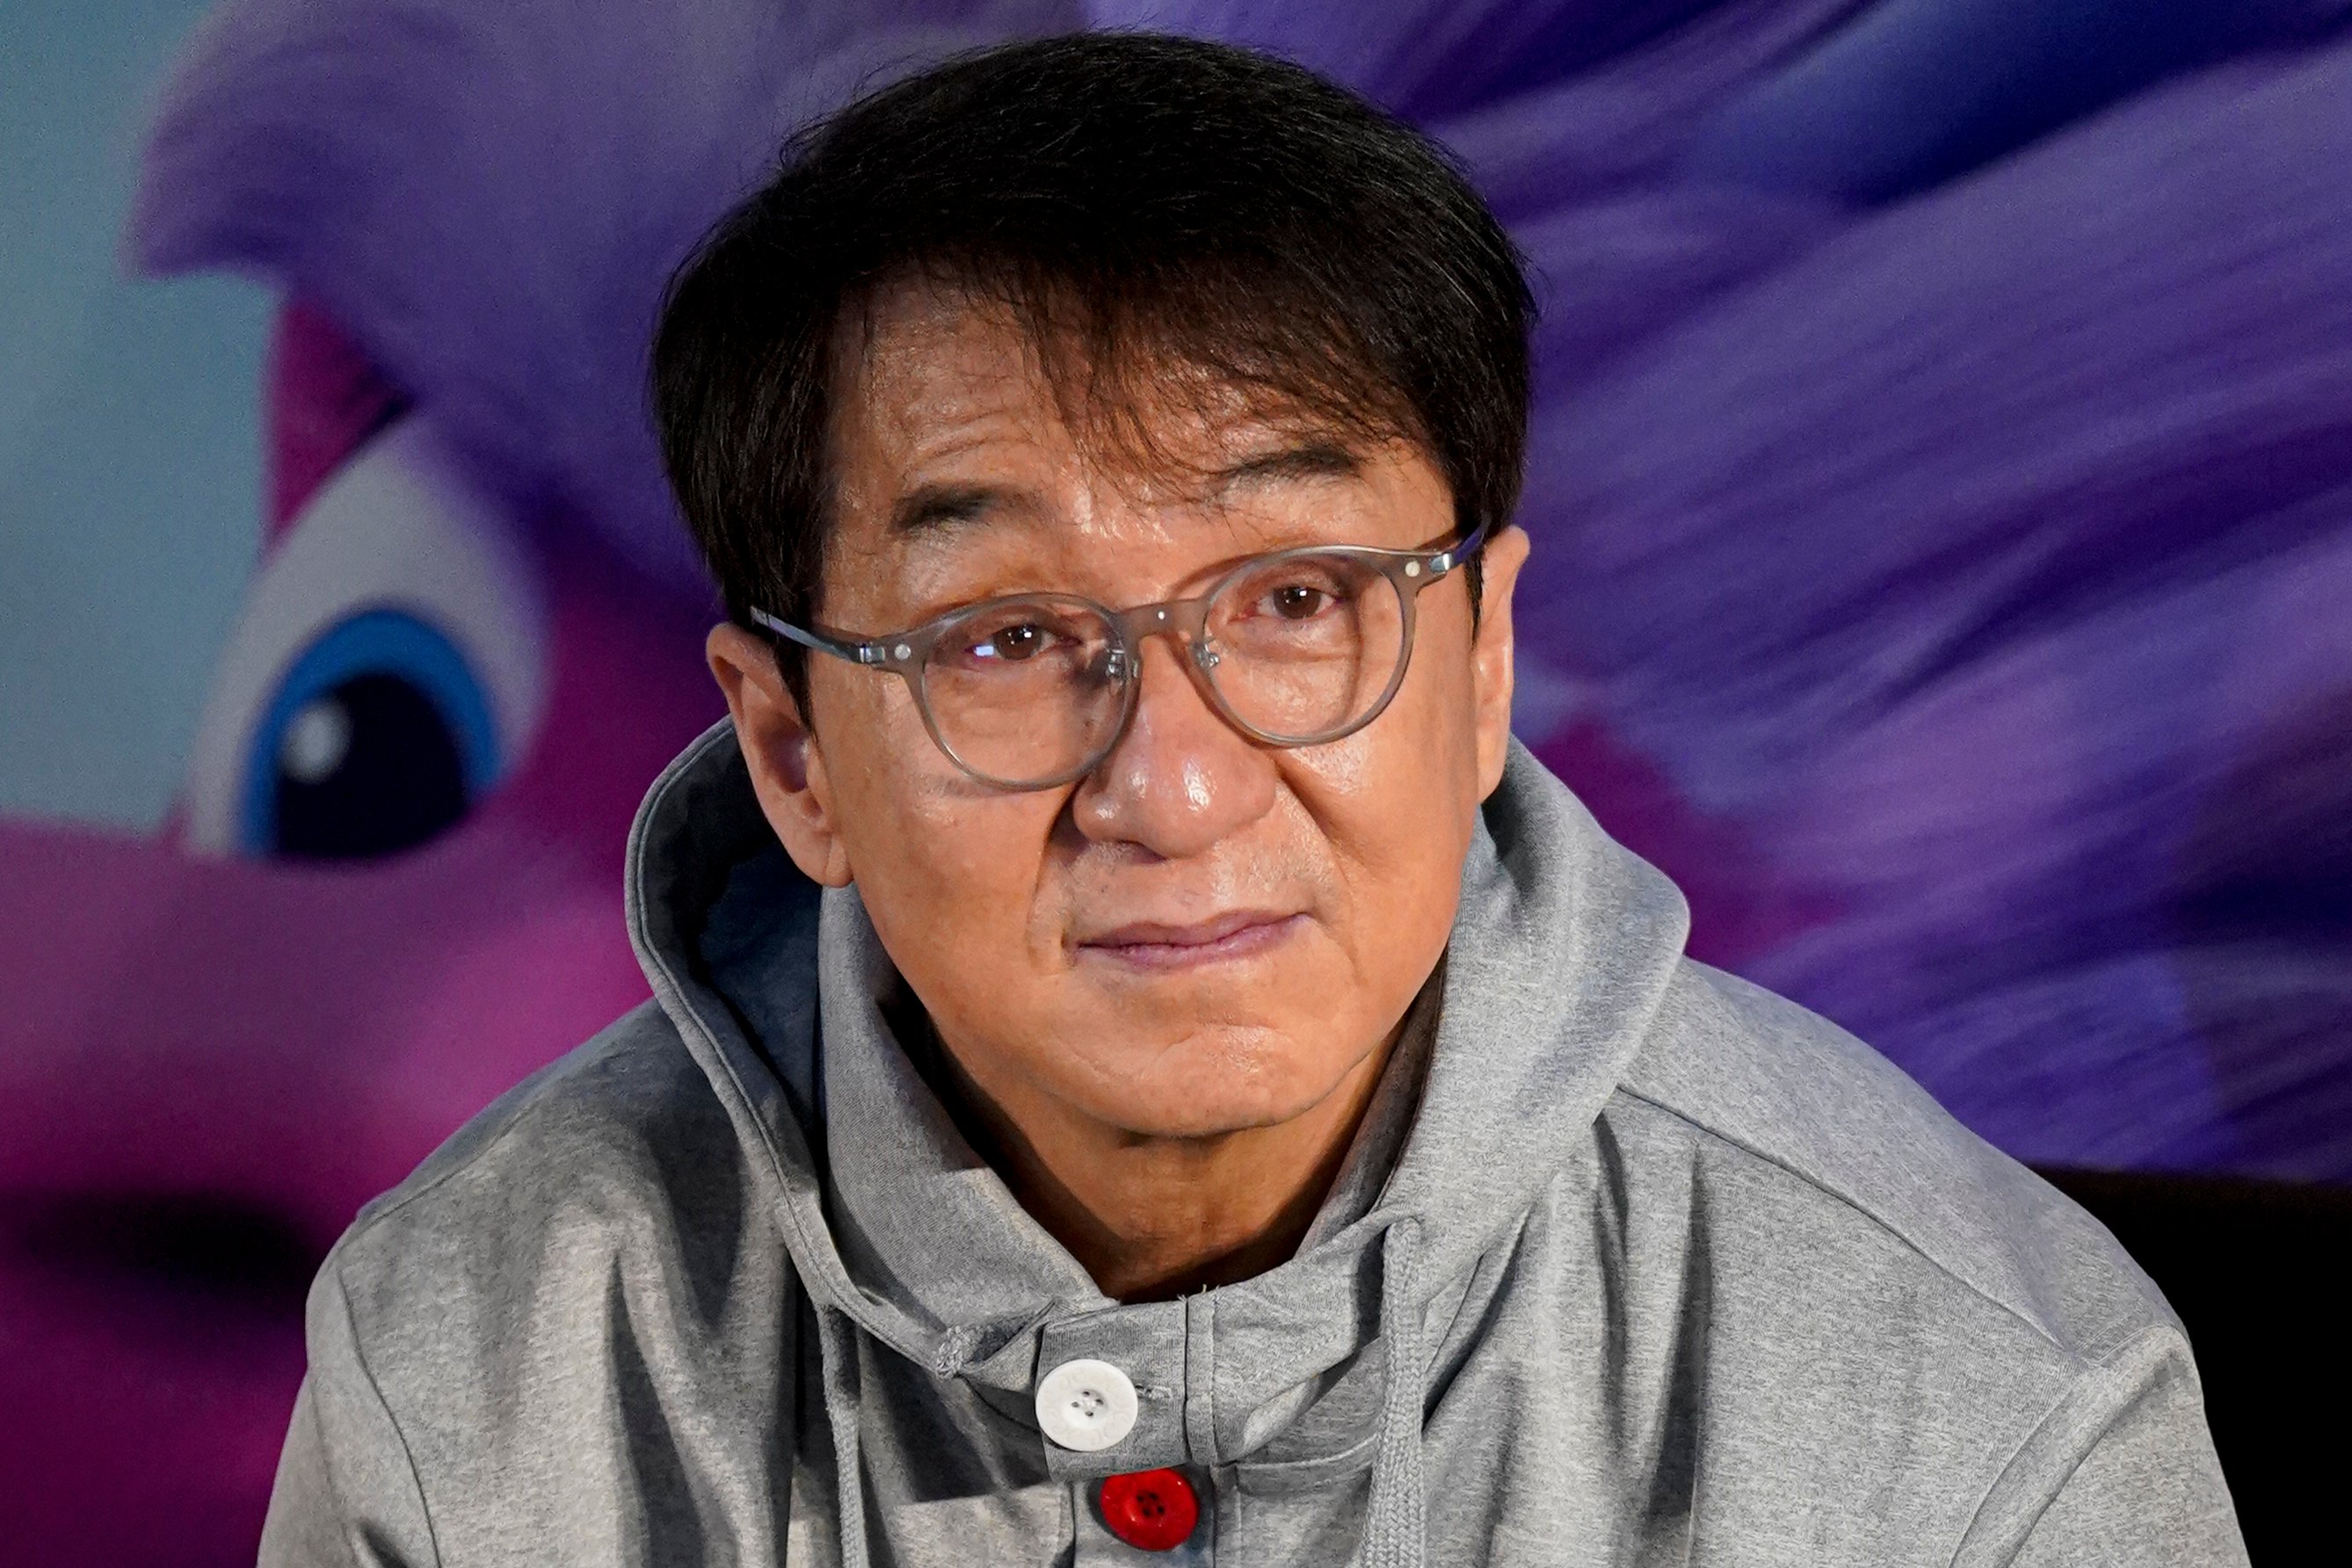 Jackie Chan at press event wearing gray hooded sweater